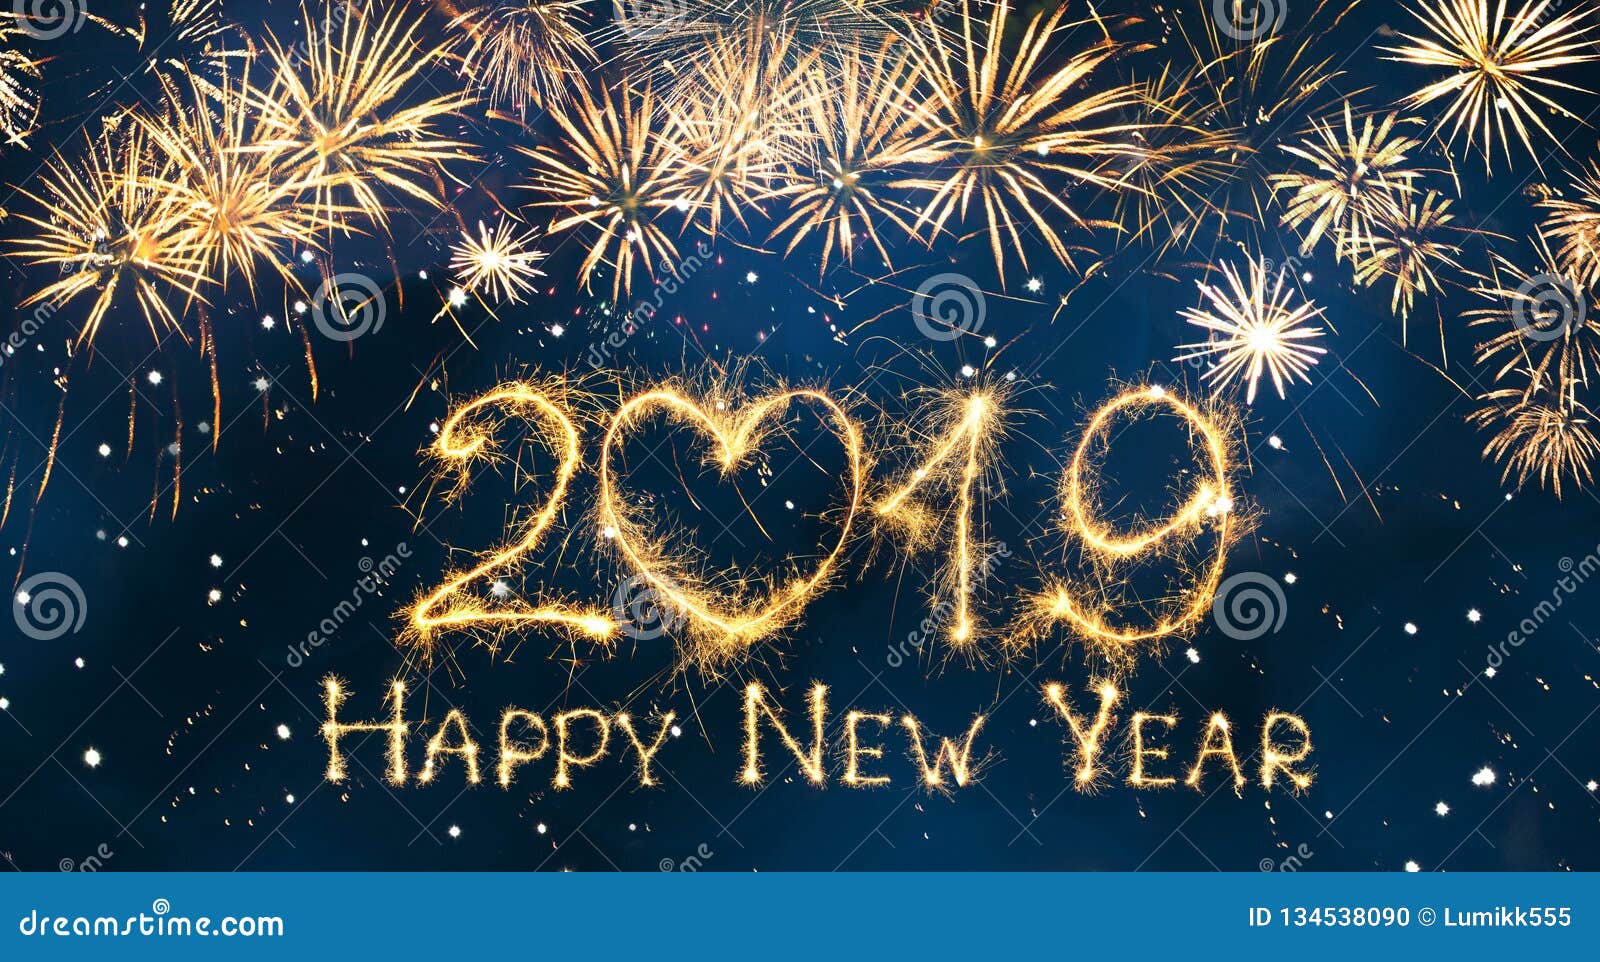 Wide Angle Greeting Card Happy New Year 2019 Stock Illustration Illustration Of Billboard Happy 134538090